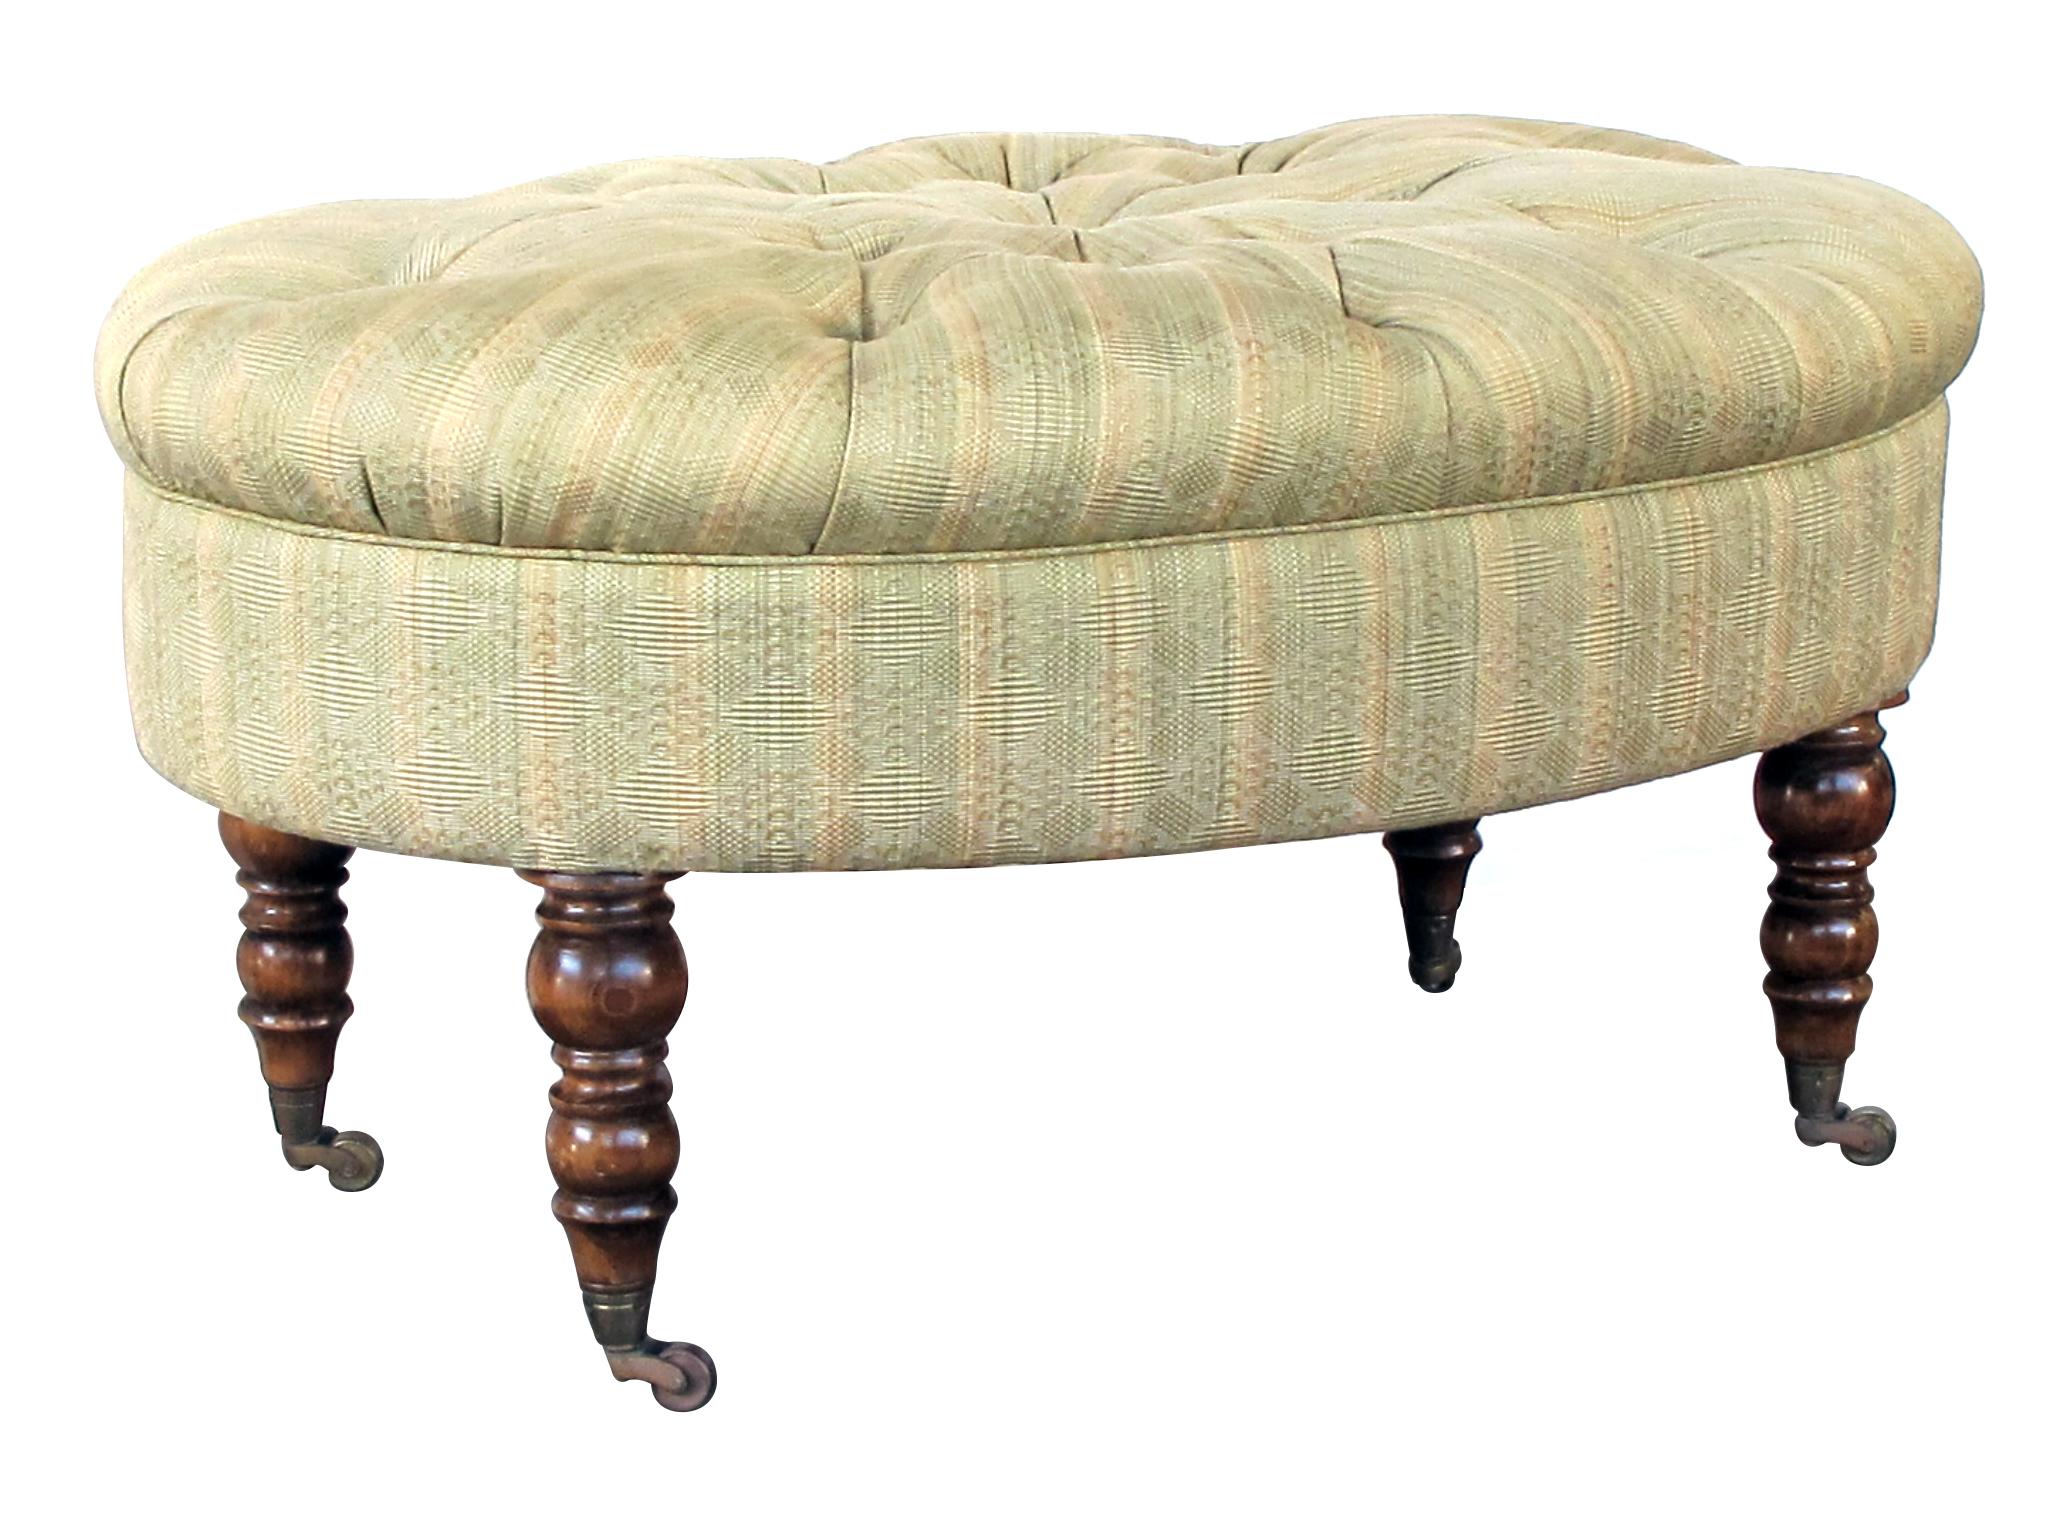 William IV Handsome English Late 19th Century Oval Ottoman/Stool with Turned Legs & Casters For Sale